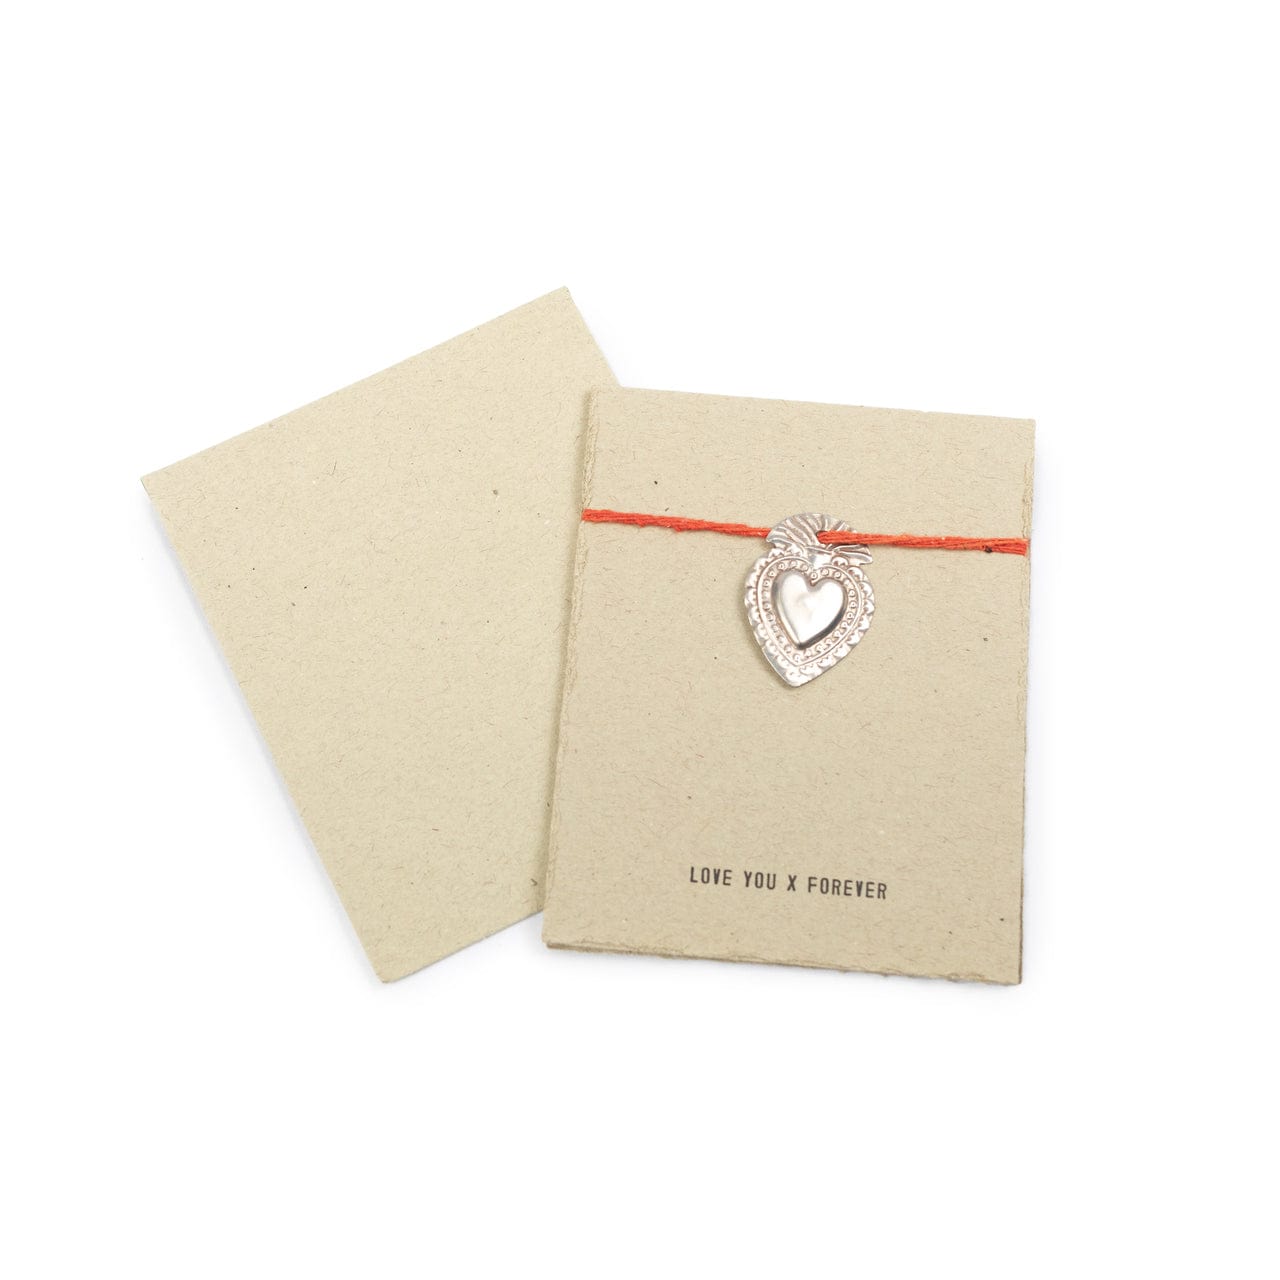 Milagro Heart Cards Sugarboo Designs Greeting Card Love you forever